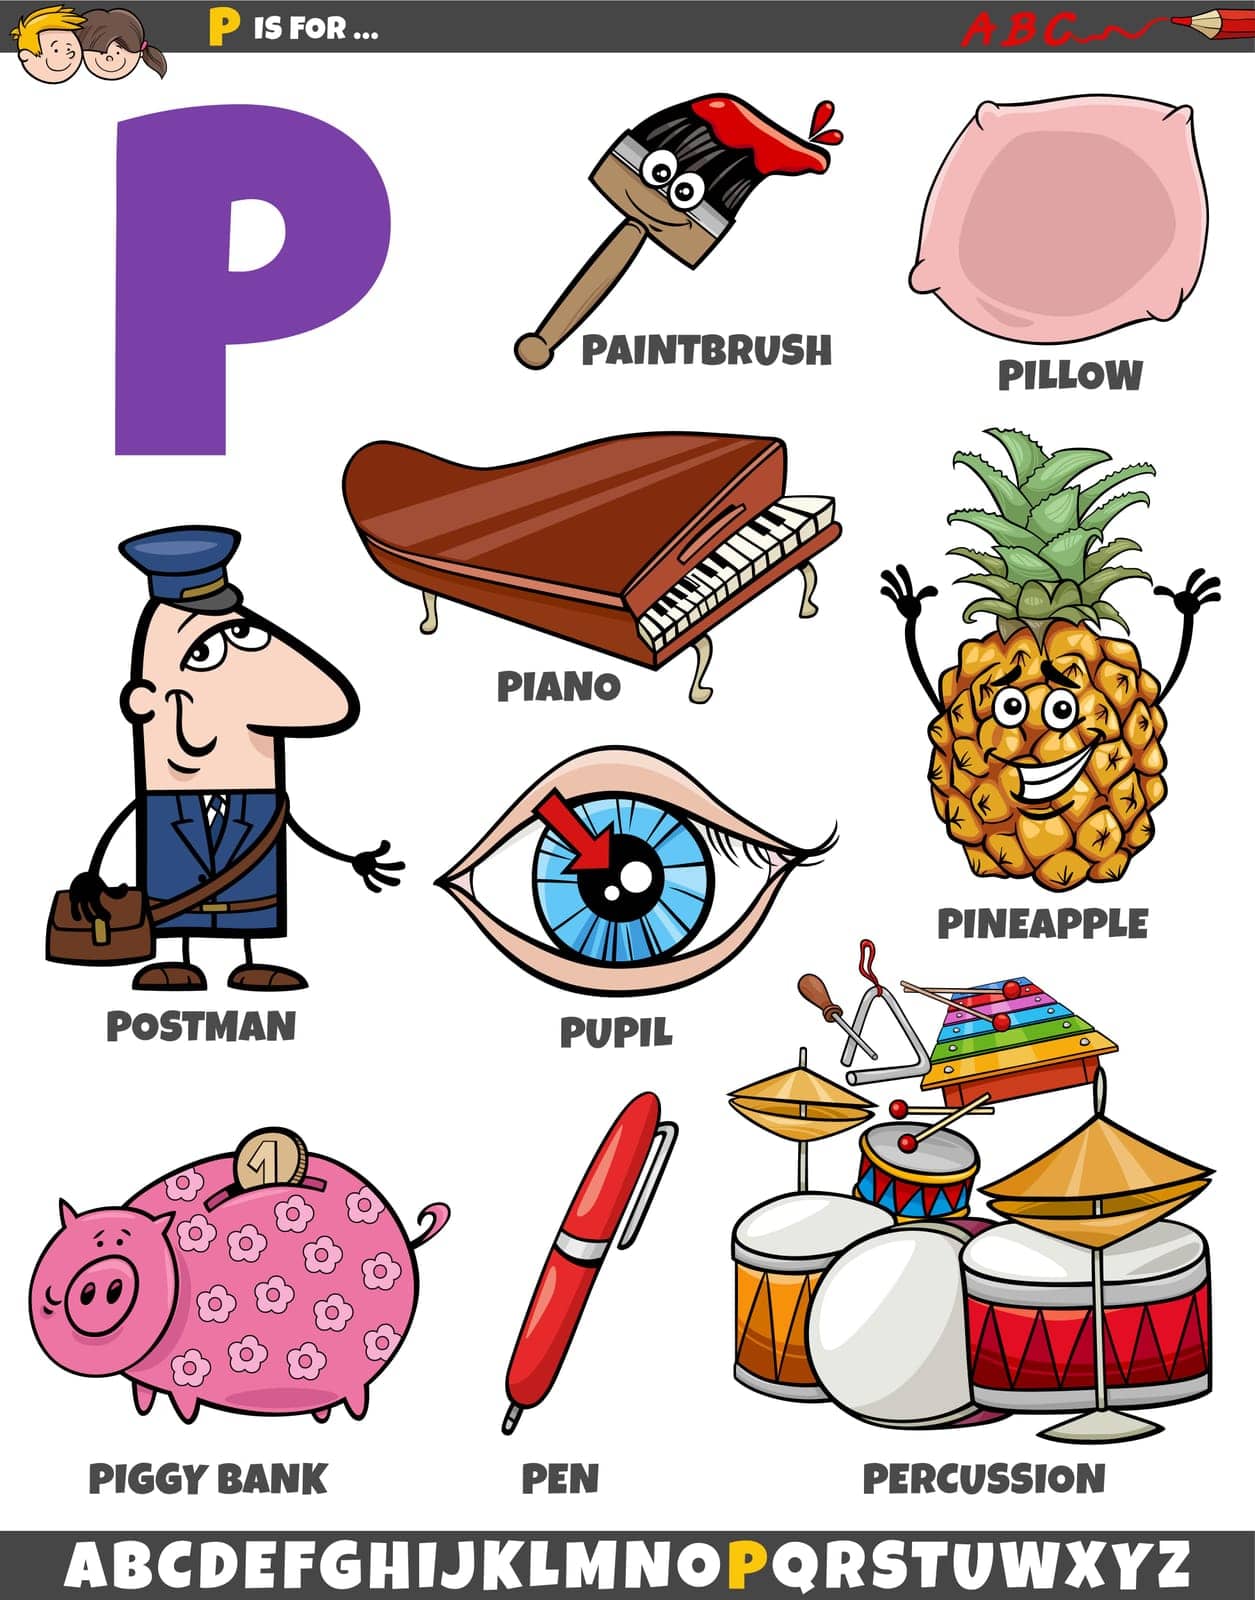 Cartoon illustration of objects and characters set for letter P